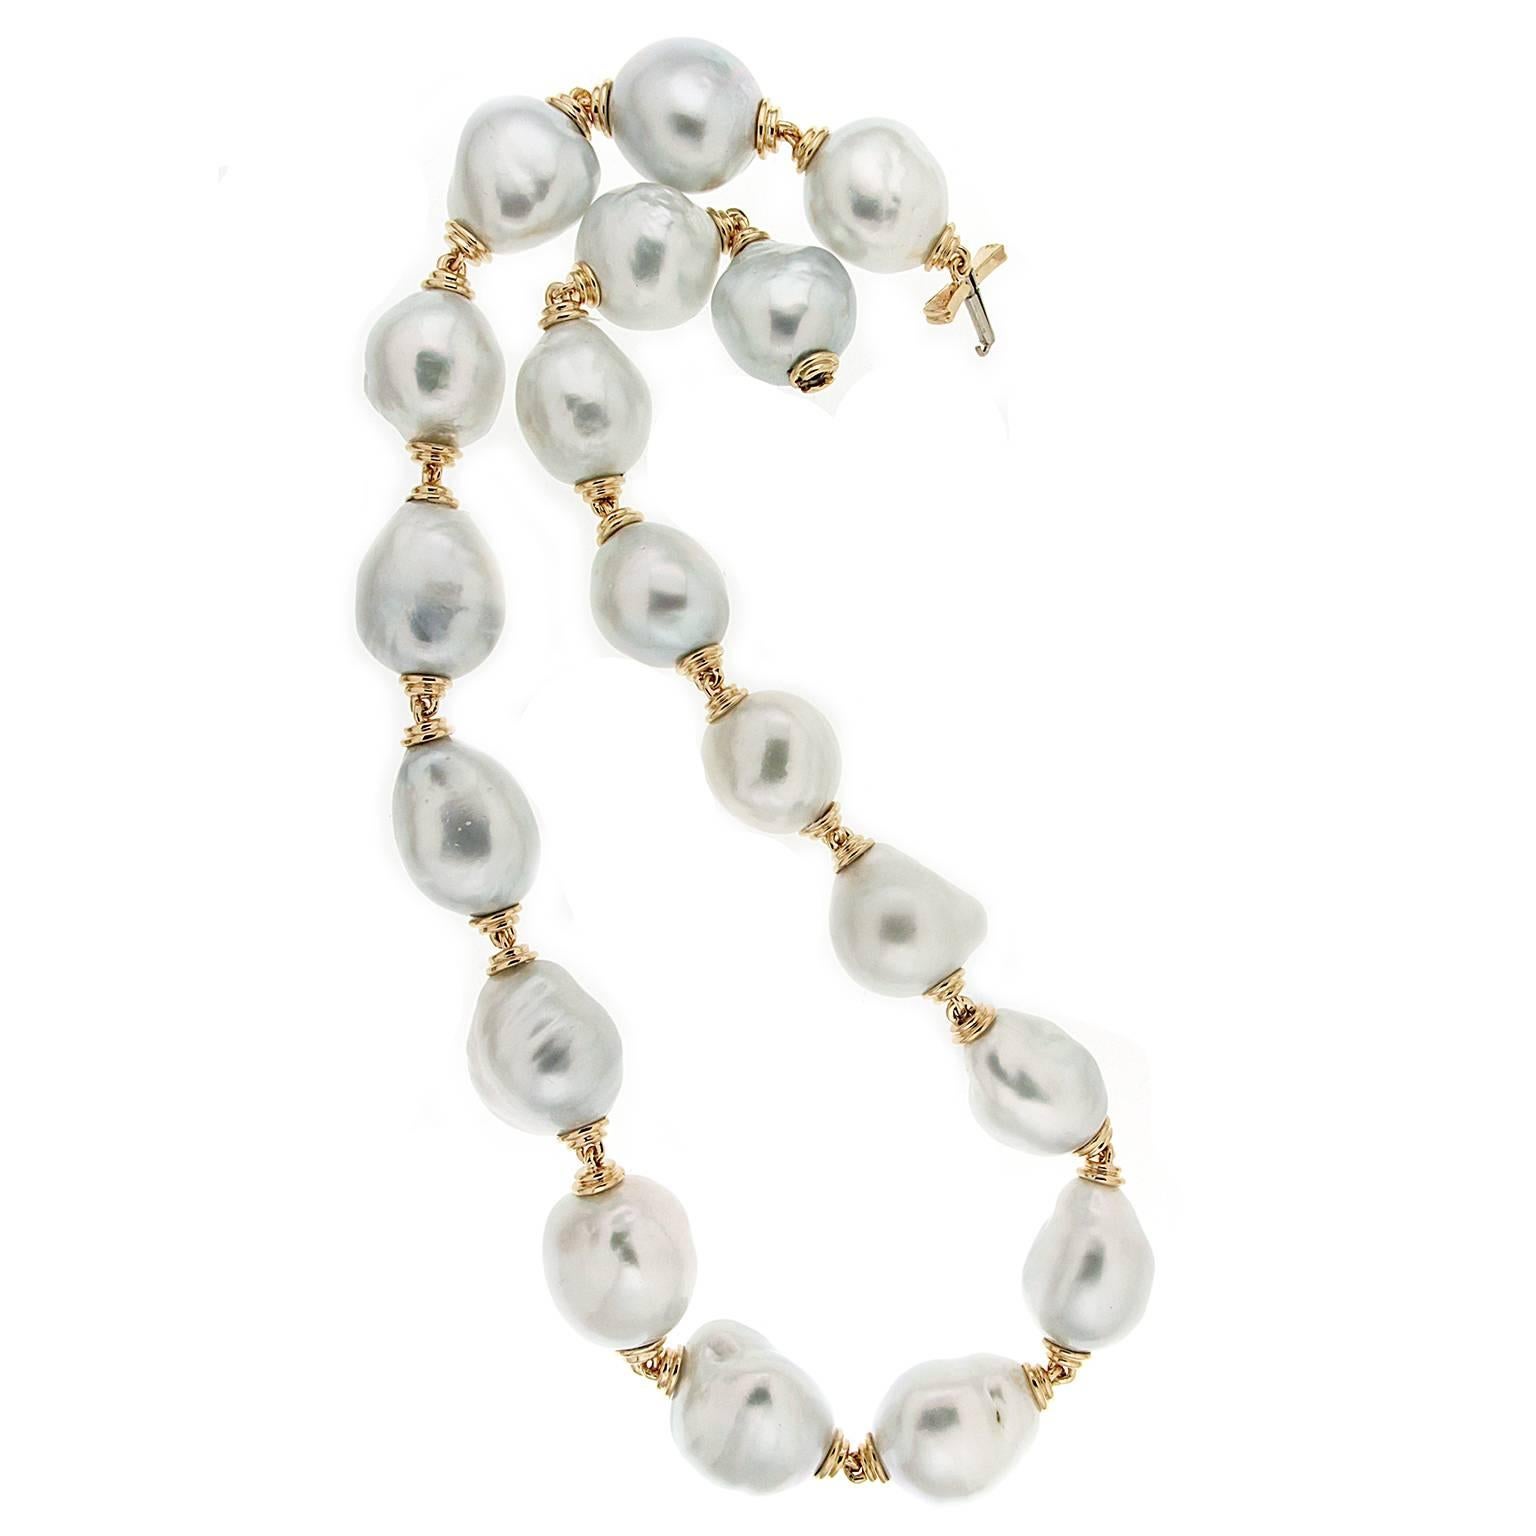 This necklace features 18 South Sea Baroque pearls with 18kt yellow gold connectors amd clasps. The pearl size ranges from 20.7 x 18.3 mm to  18.2 x 16.7 mm.